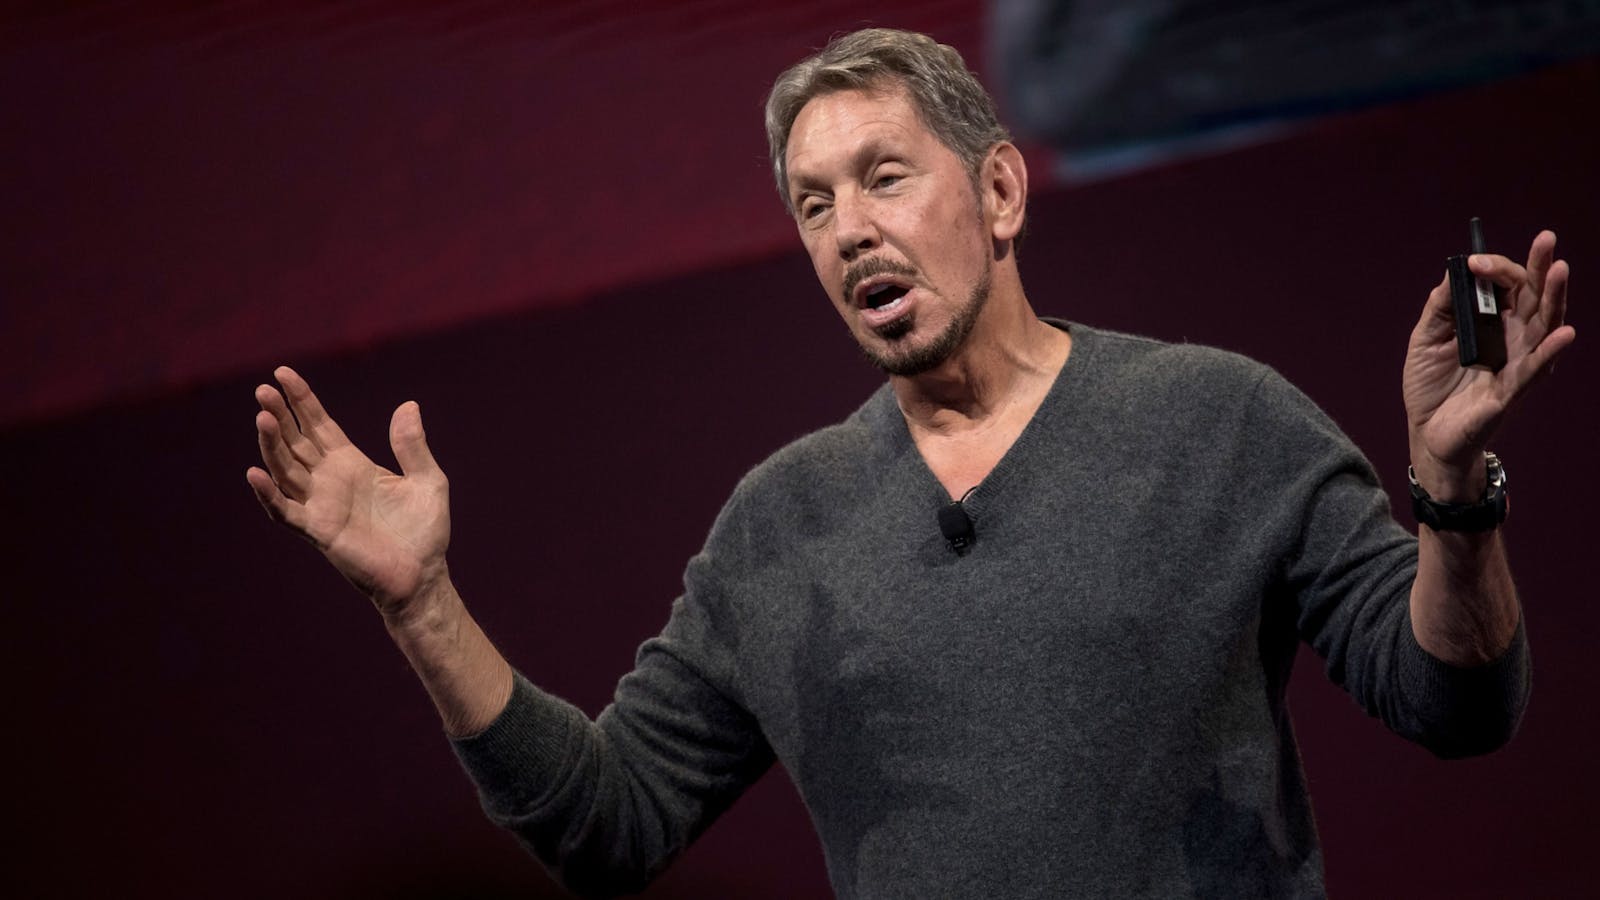 Larry Ellison. Photo by Bloomberg.